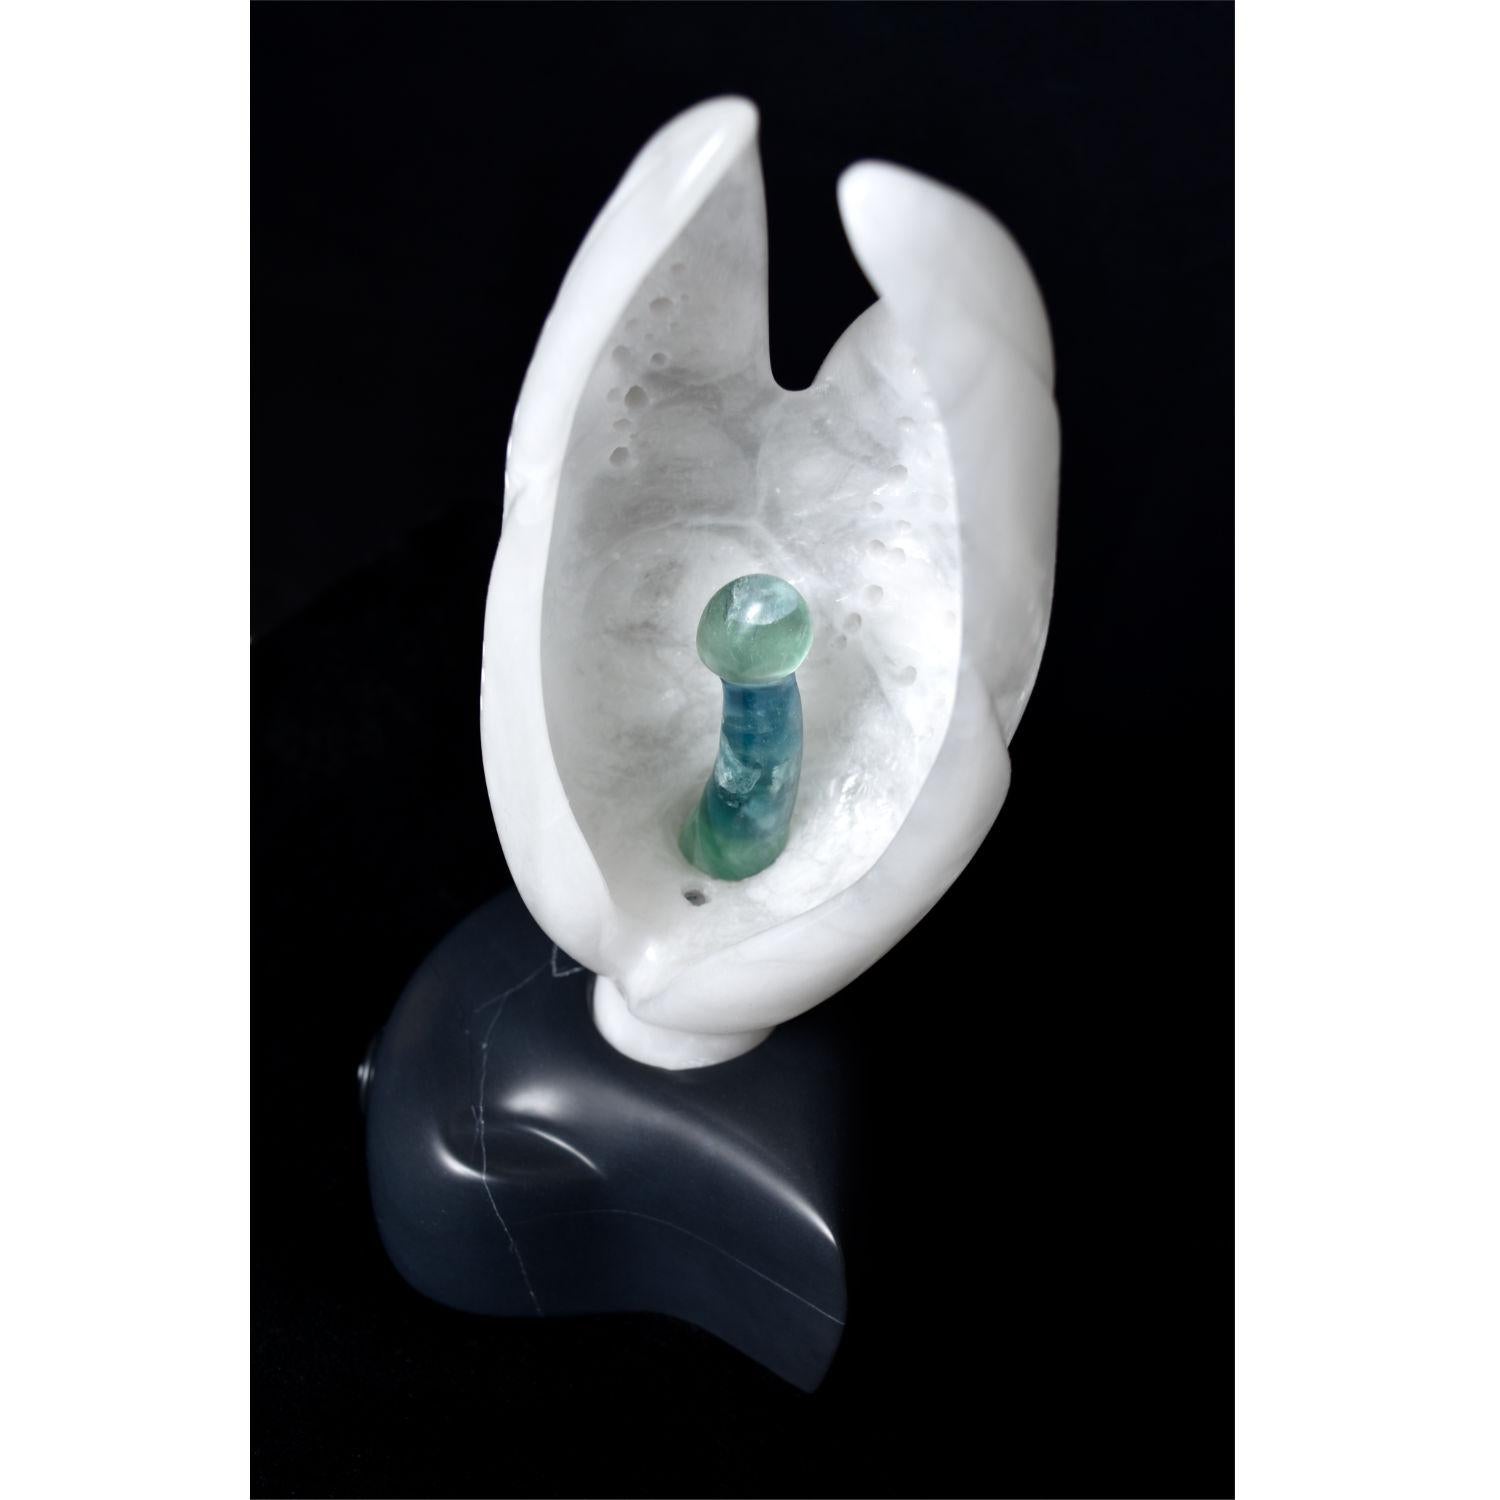 Chrysalis White Alabaster Ebony Soapstone UV Lighted Metaphysical Sculpture In New Condition For Sale In Chattanooga, TN